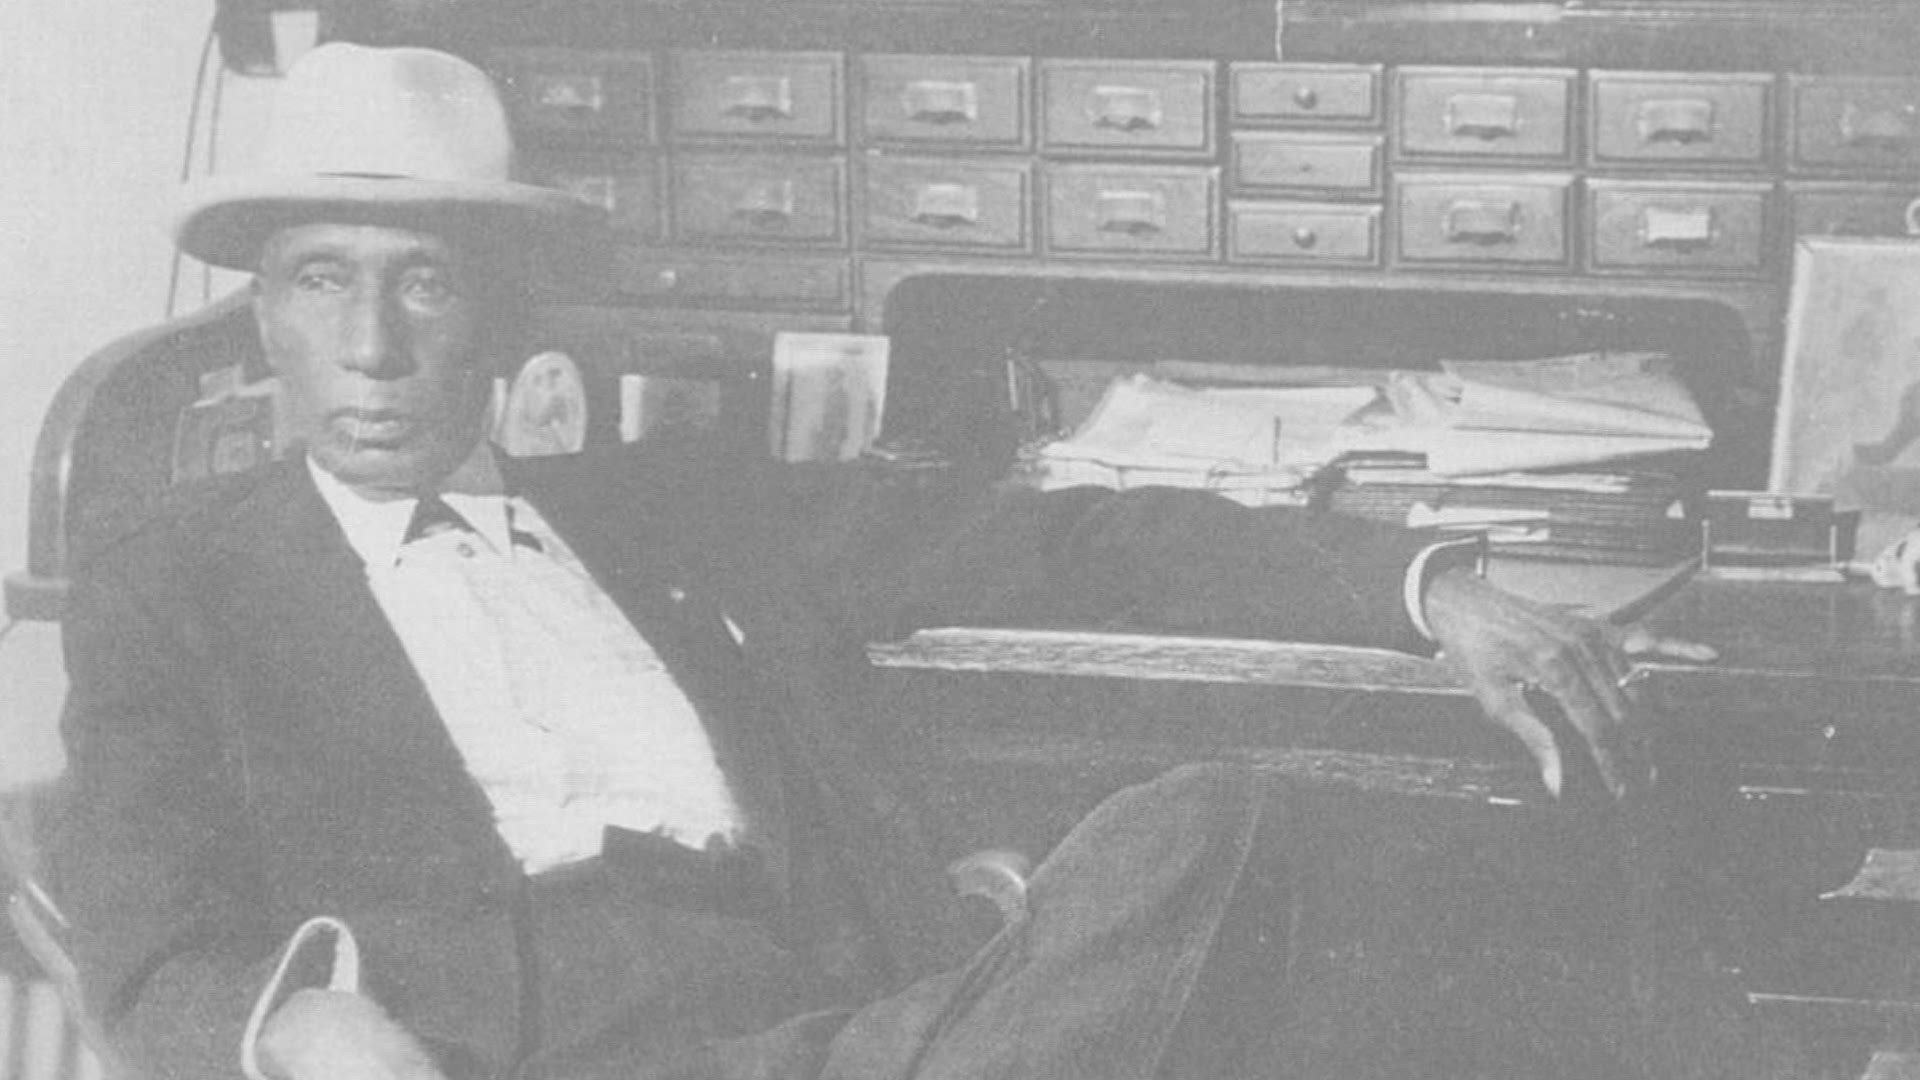 William McDonald created Fort Worth’s first Black-owned bank and helped open up opportunities for many Black people in North Texas.